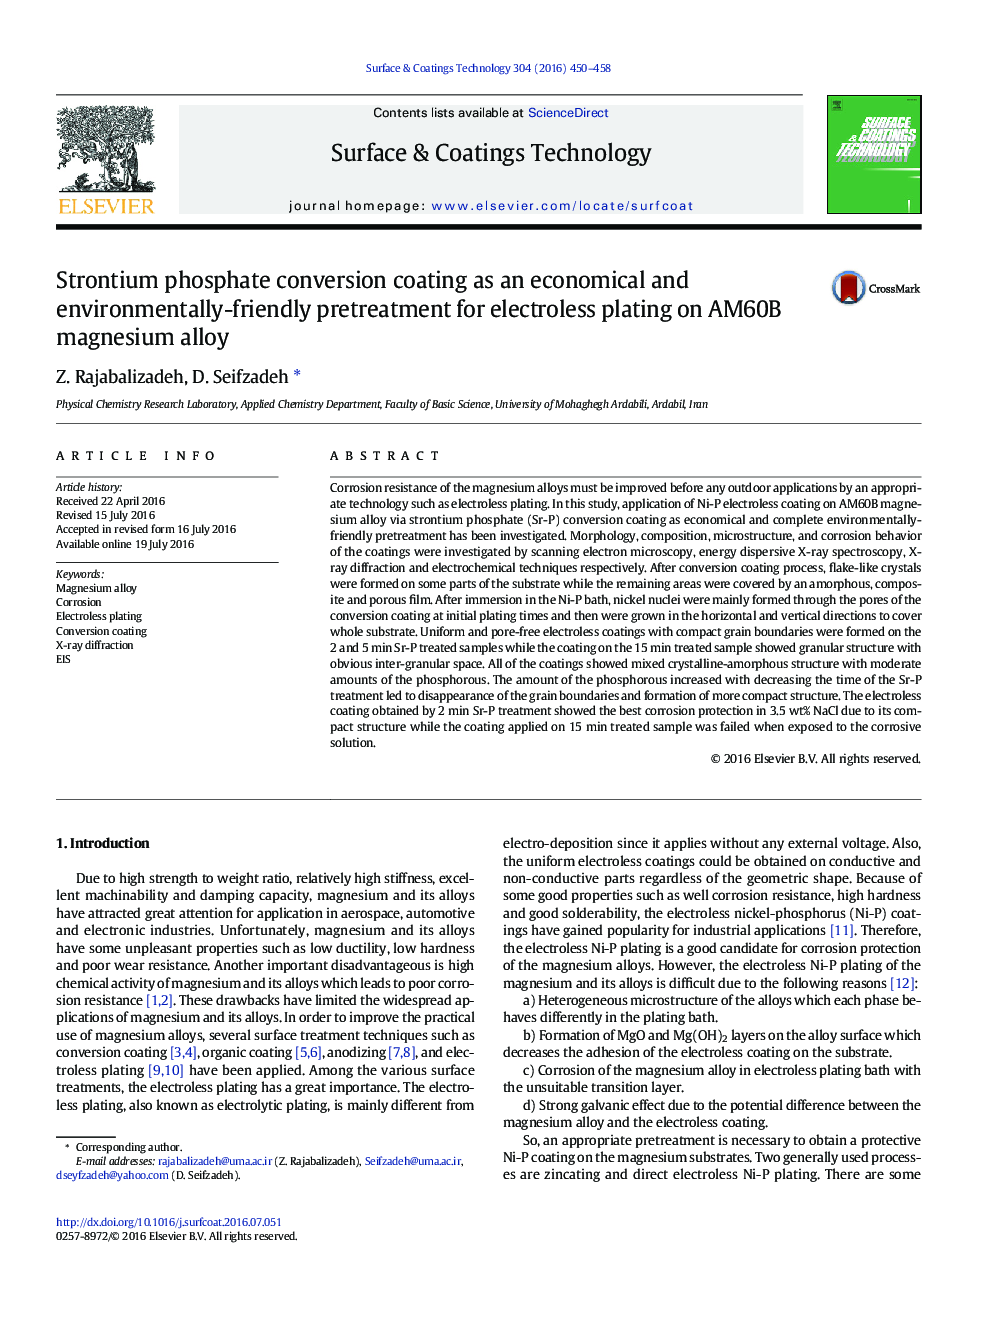 Strontium phosphate conversion coating as an economical and environmentally-friendly pretreatment for electroless plating on AM60B magnesium alloy